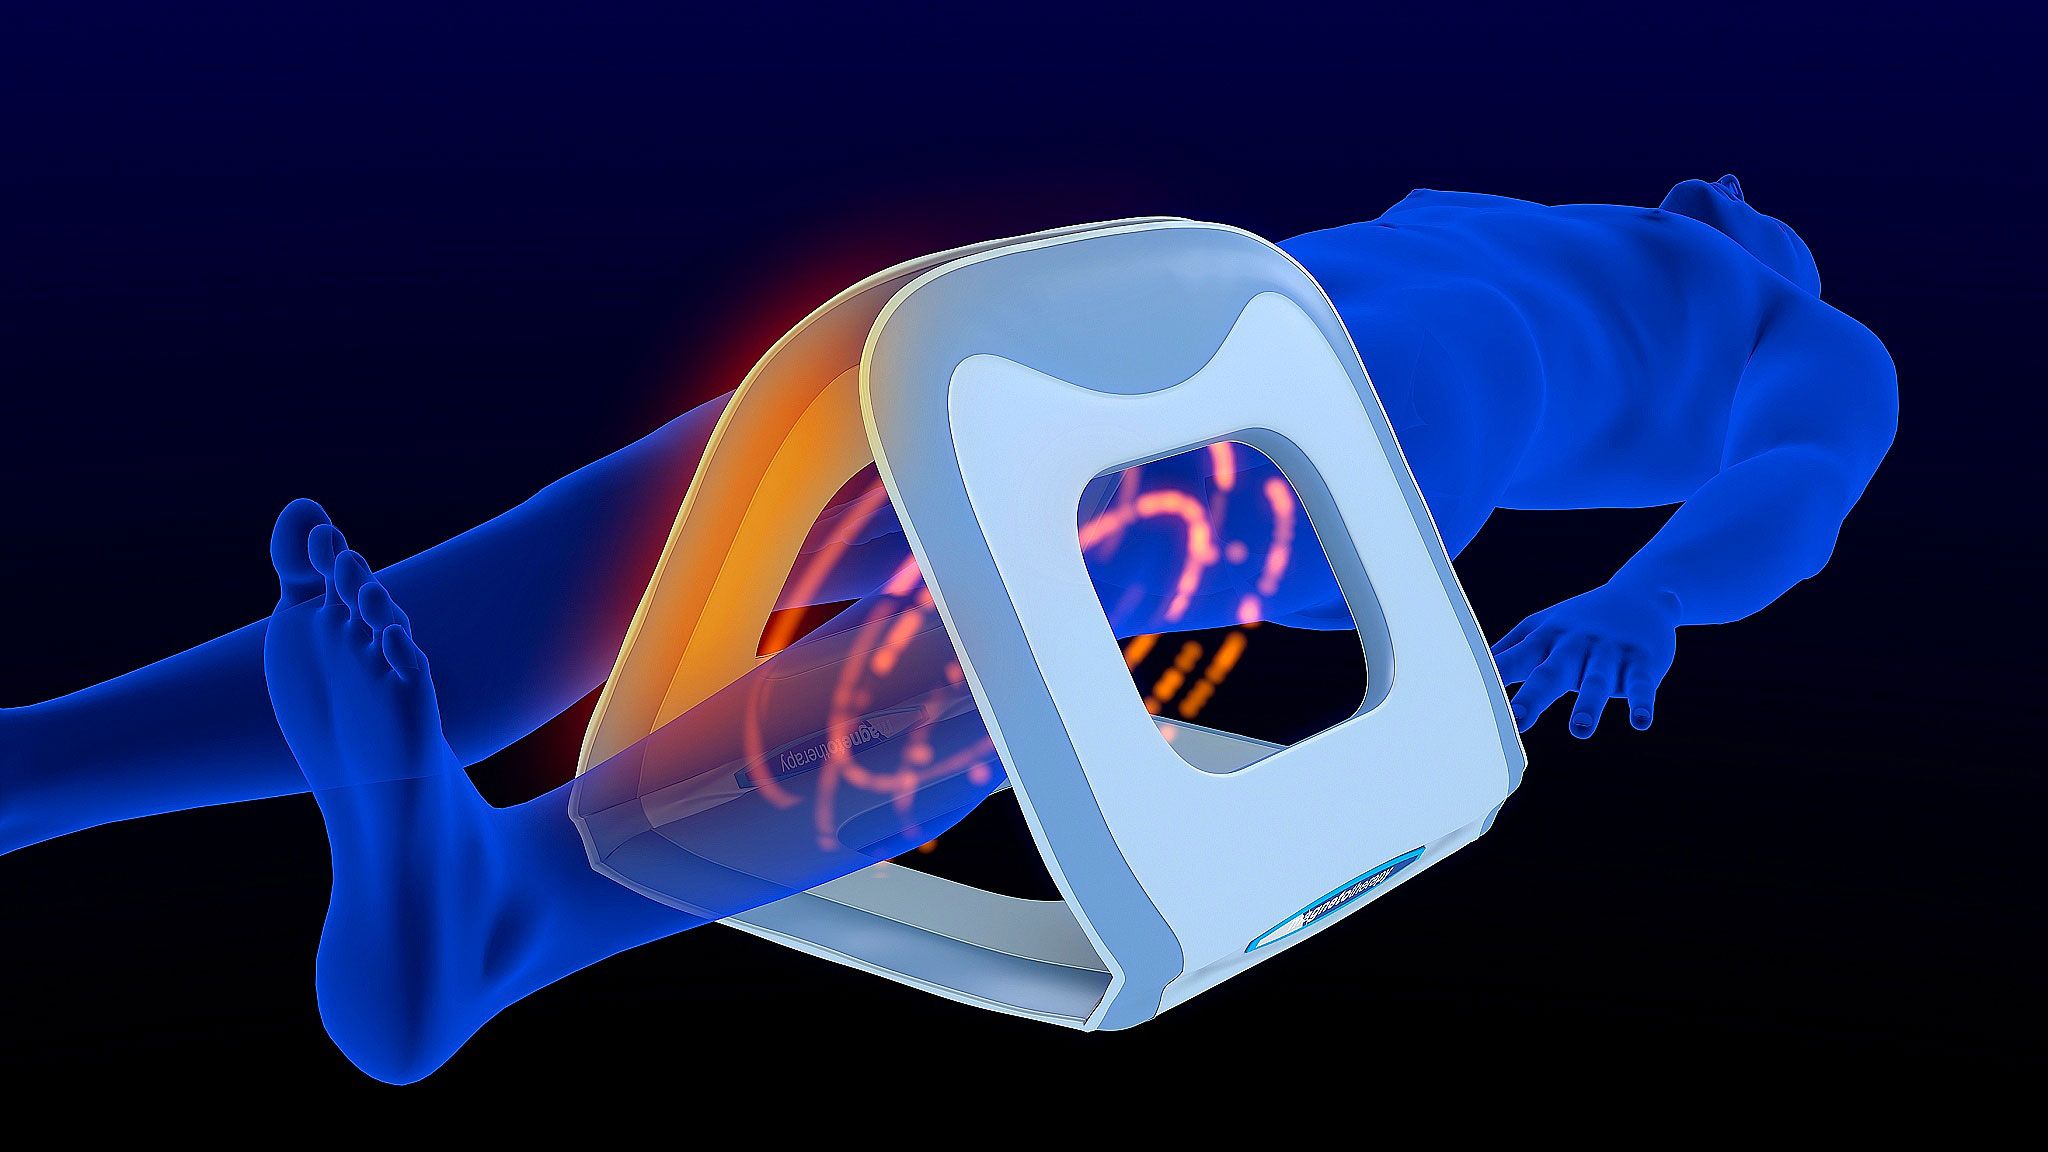 Pulsed electromagnetic field therapy